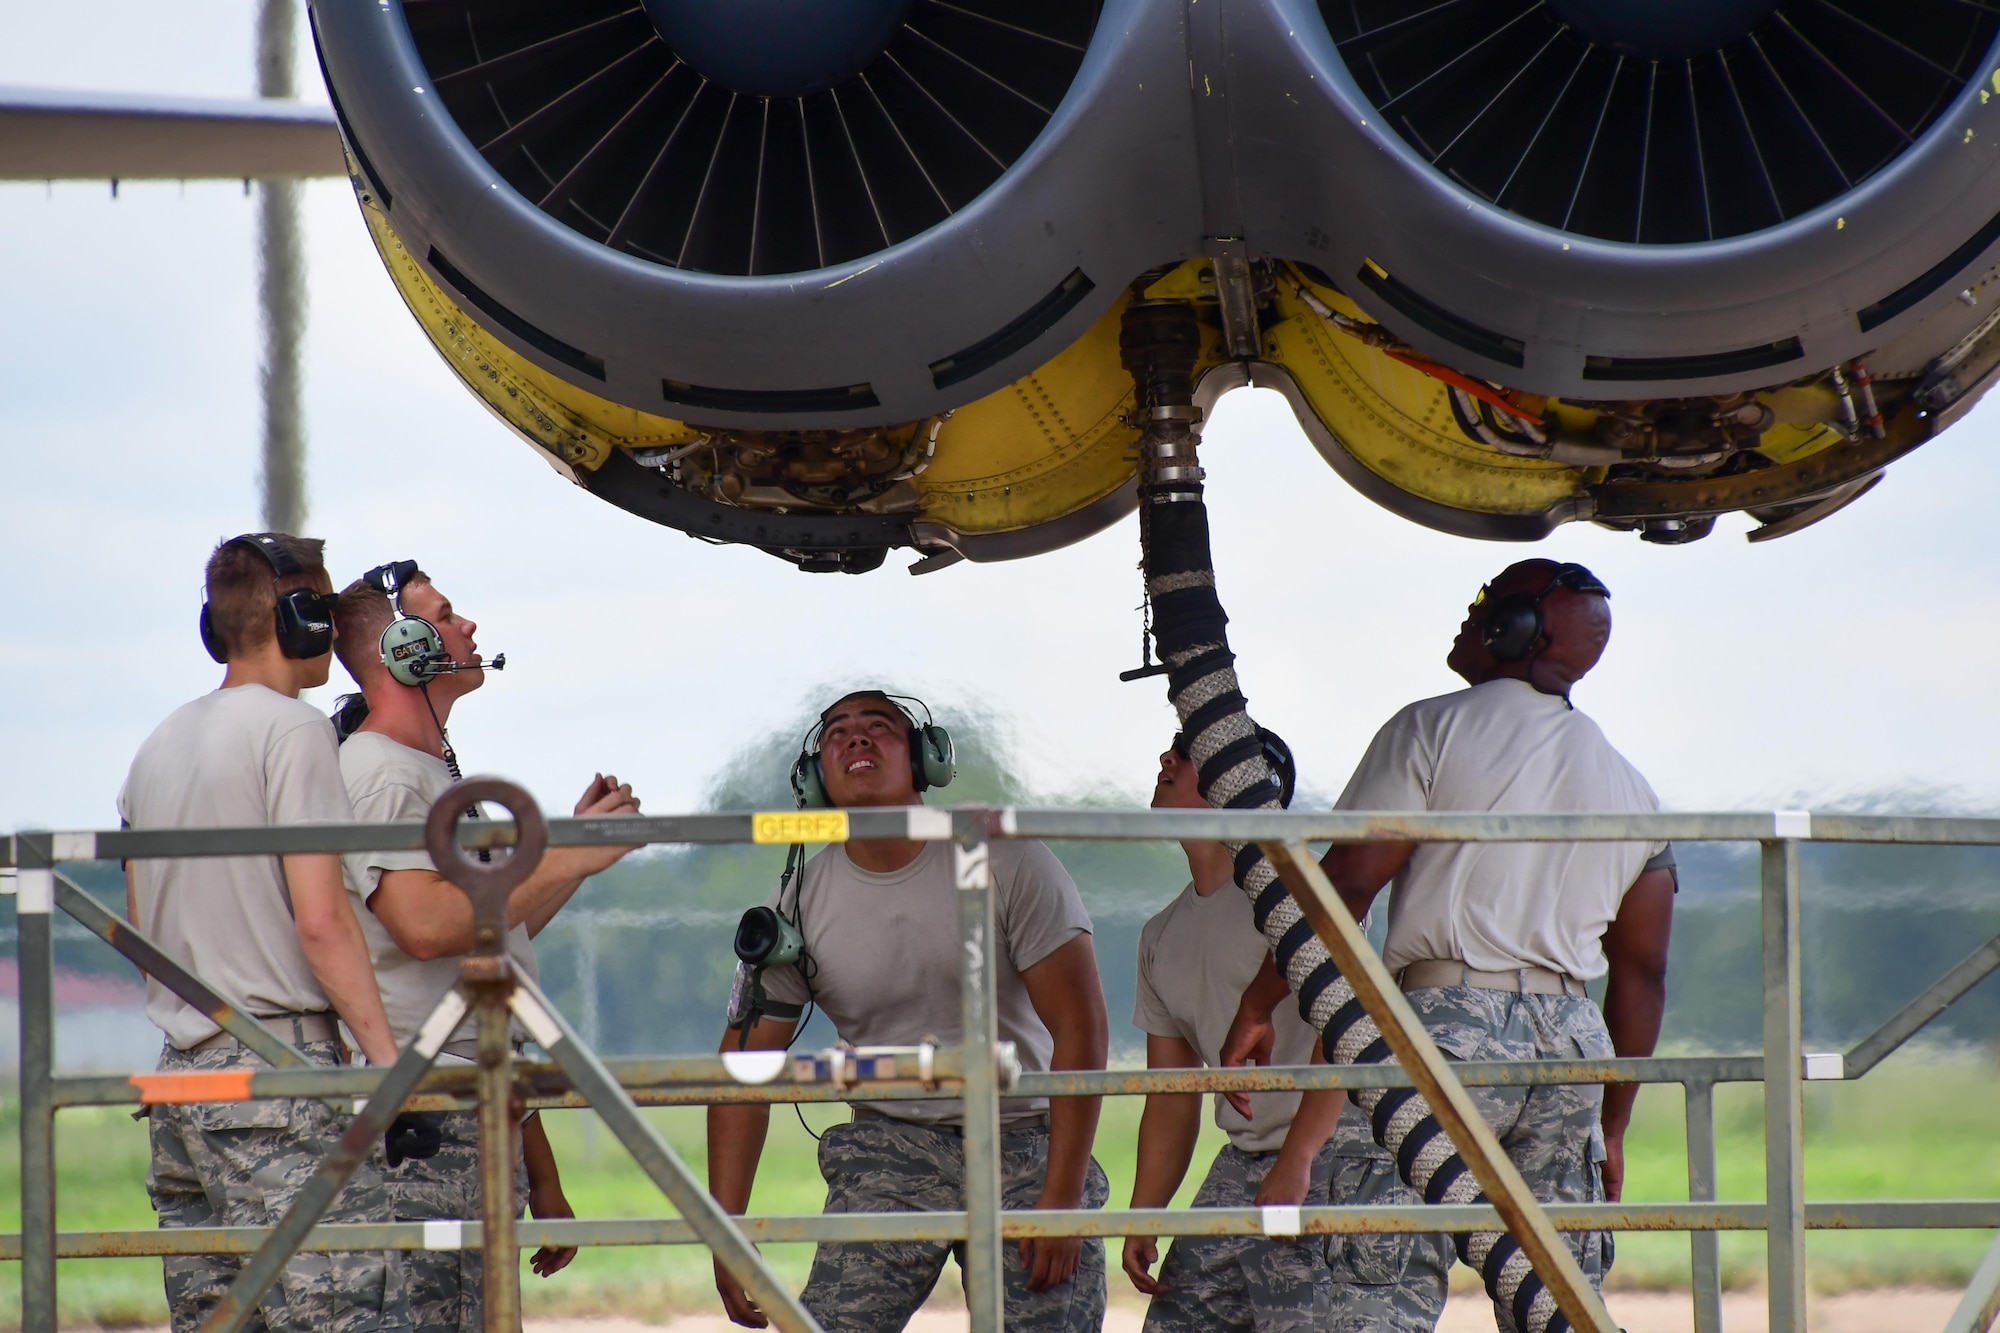 Airmen assigned to the 307th Maintenance Squadron inspect the running engines a B-52 Stratofortress for leaks on Barksdale Air Force Base, La. June 29, 2017. The engine run is one of the final parts of a phase inspection of the bomber and multiple eyes are needed as well as valuable training is received by everyone helping out with the inspection. (U.S. Air Force photo by Master Sgt. Dachelle Melville/Released)